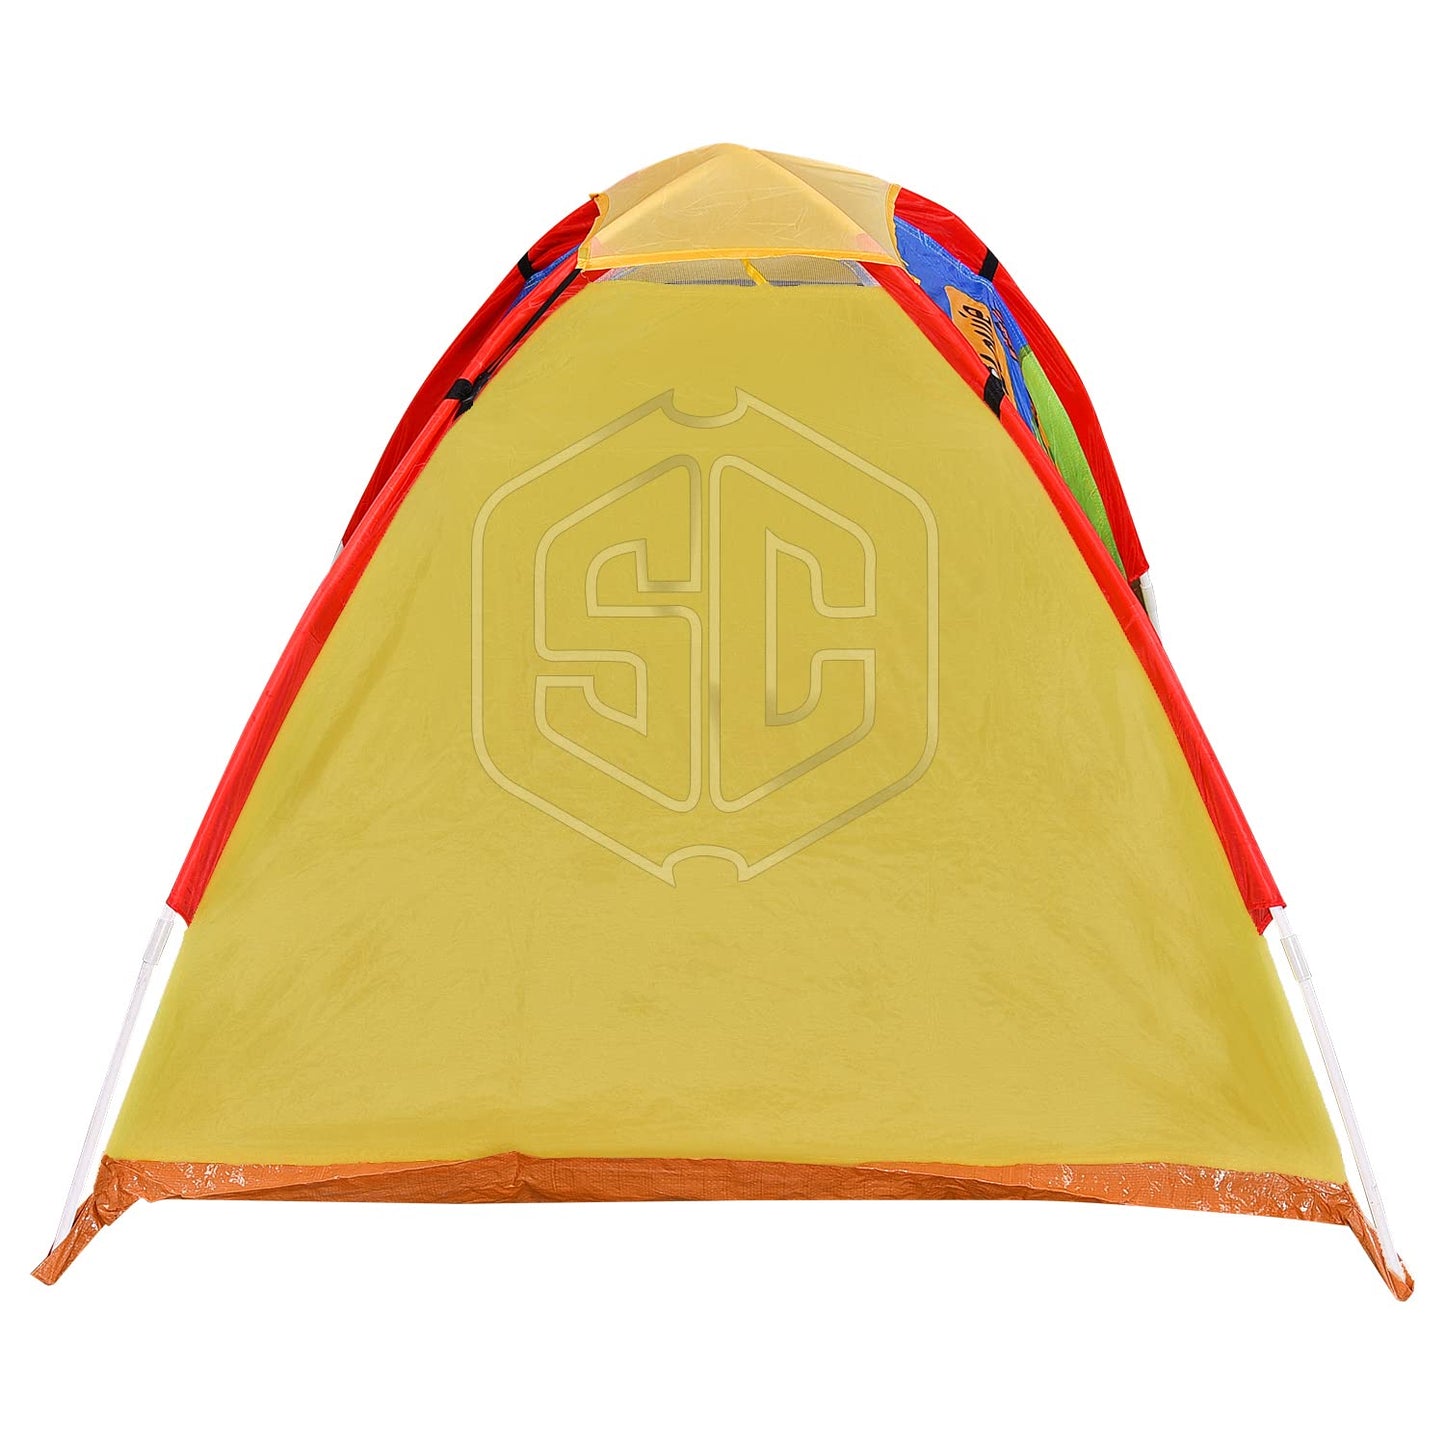 Play Tent For Kids, Play Tunnel, Kids Tent, Children's Tent